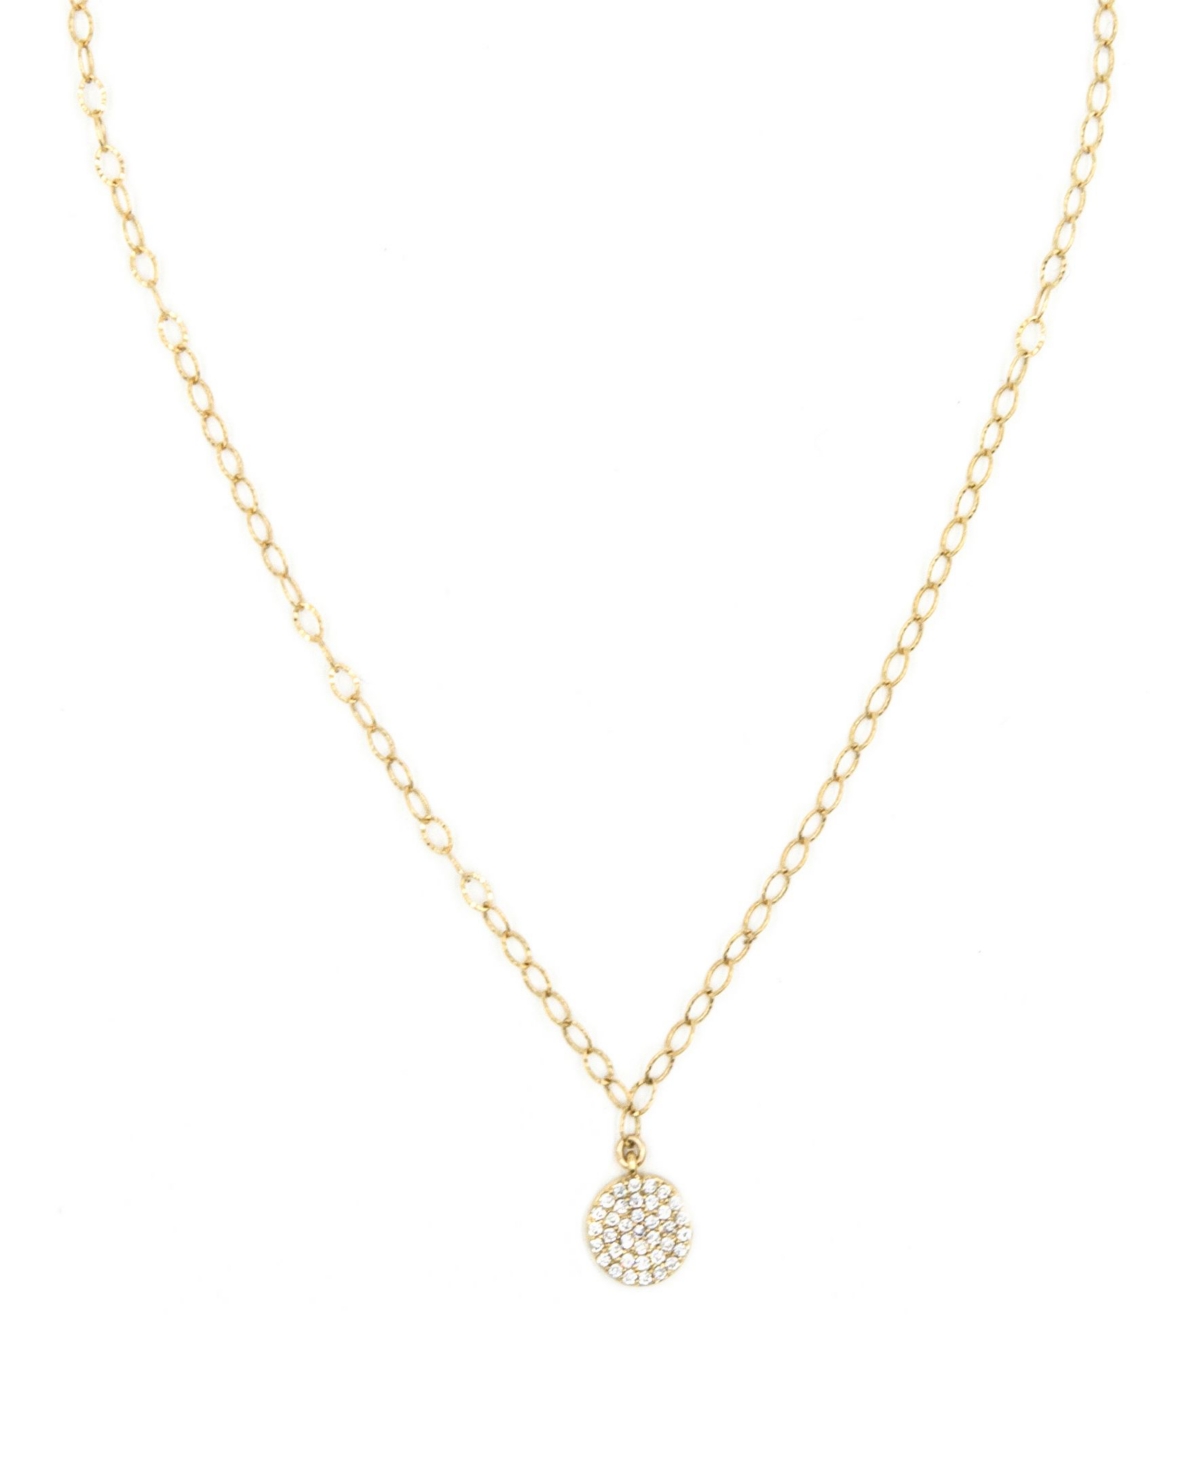 ROBERTA SHER DESIGNS 14K GOLD FILLED PAVE DISK CHARM ON CHAIN